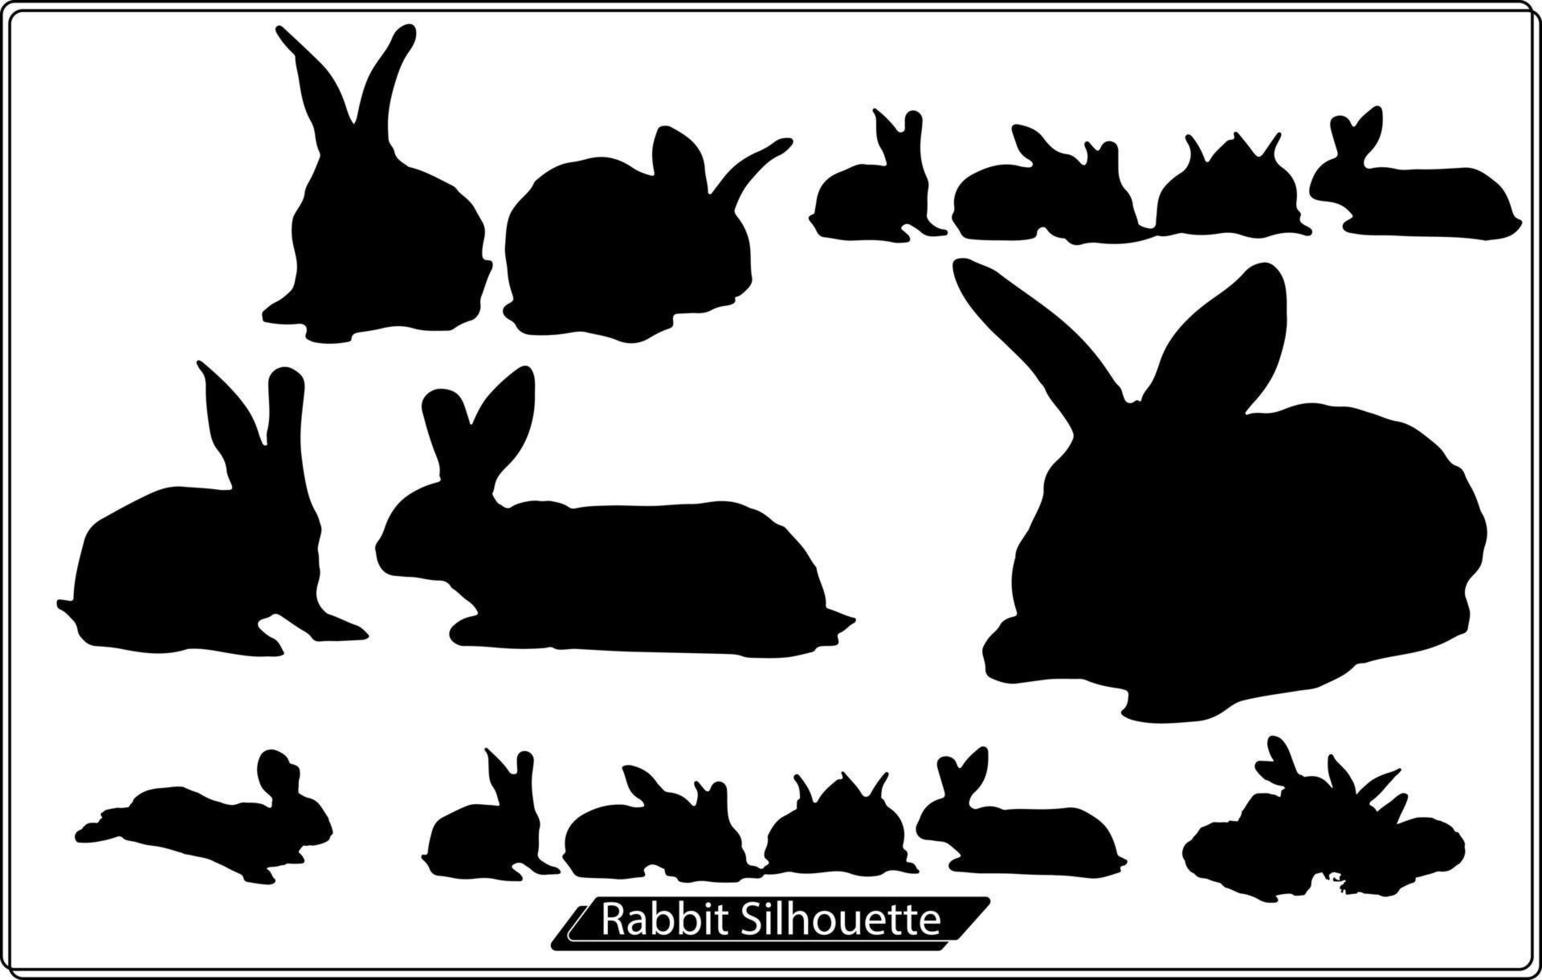 Rabbit Silhouettes of easter bunnies isolated on a white background. vector